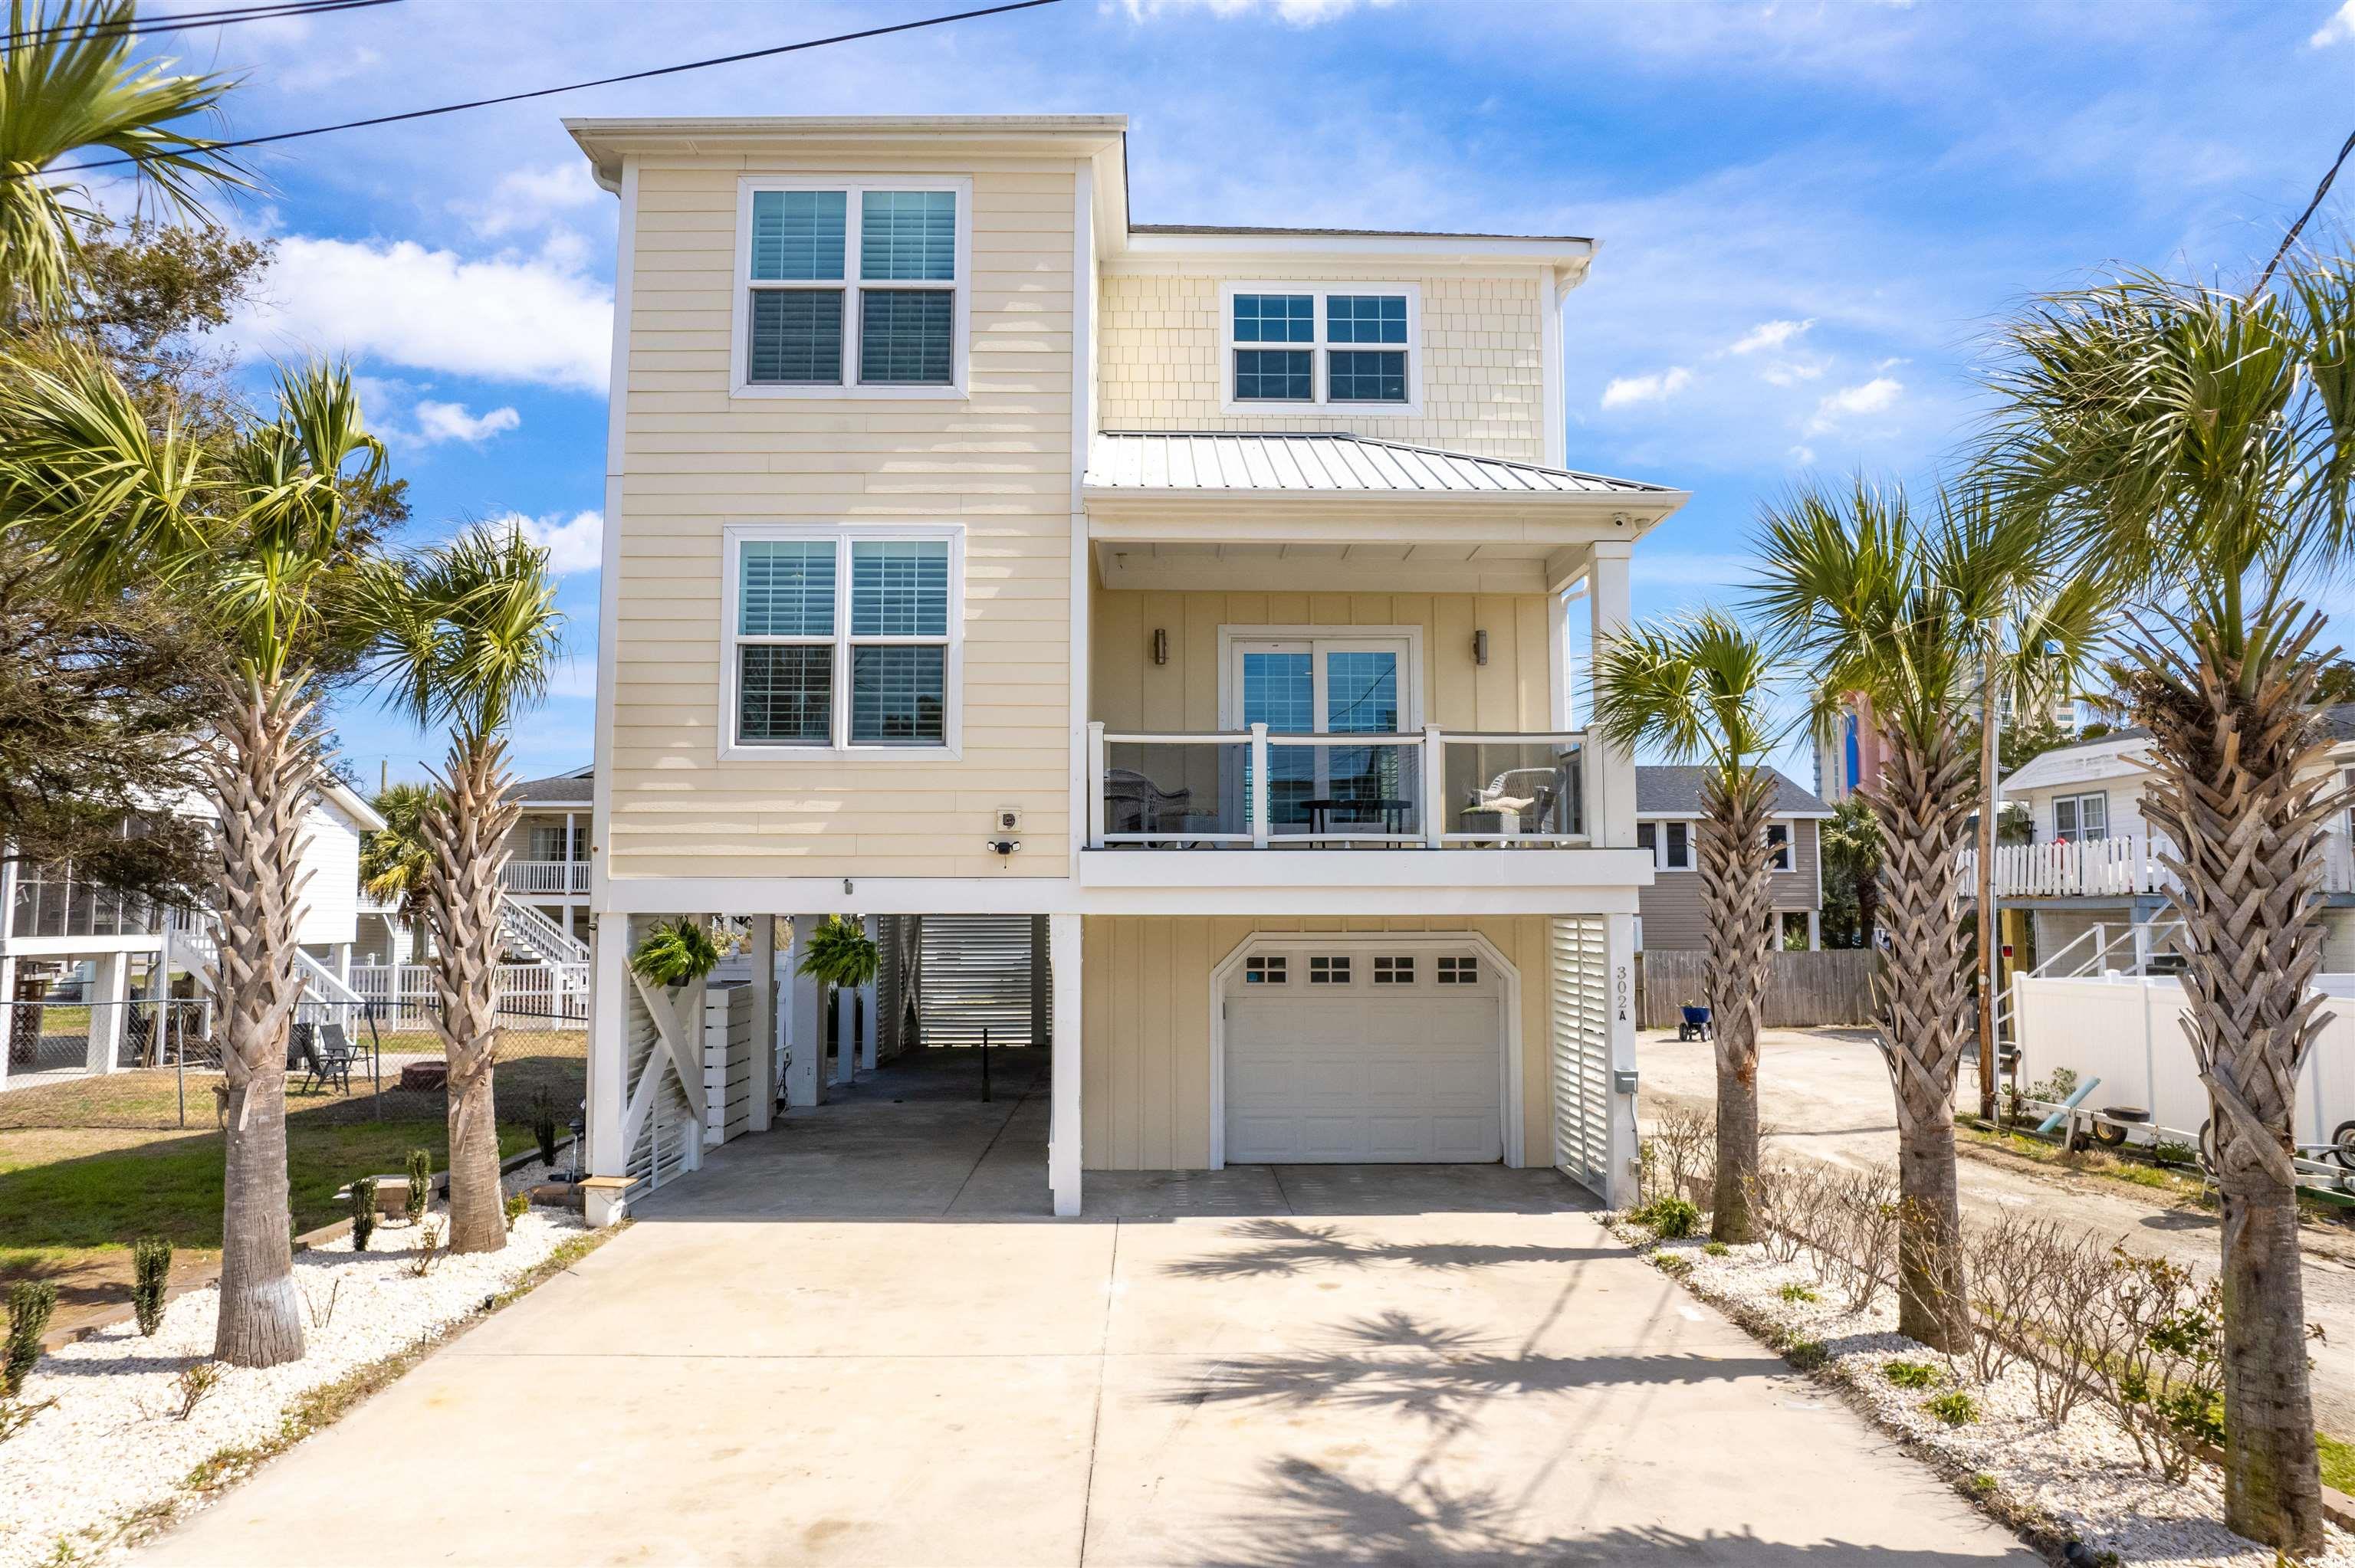 **you need to see the live video of cherry grove and this home! ask you agent for the link!** located in cherry grove in north myrtle beach! this home is located just little over a block from the famous cherry grove beach pier and the beach! this wonderful home is also located close to the cherry grove boat ramp for you to get out of the water at cherry grove and take hog inlet out to the ocean! the home itself is 4 bedrooms, 4 baths, with a garage, and parking with storage underneath! enjoy the extremely high ceilings throughout the main living space of the home. out back is two decks and at the front of the home is a large balcony. watch the video to experience this home!